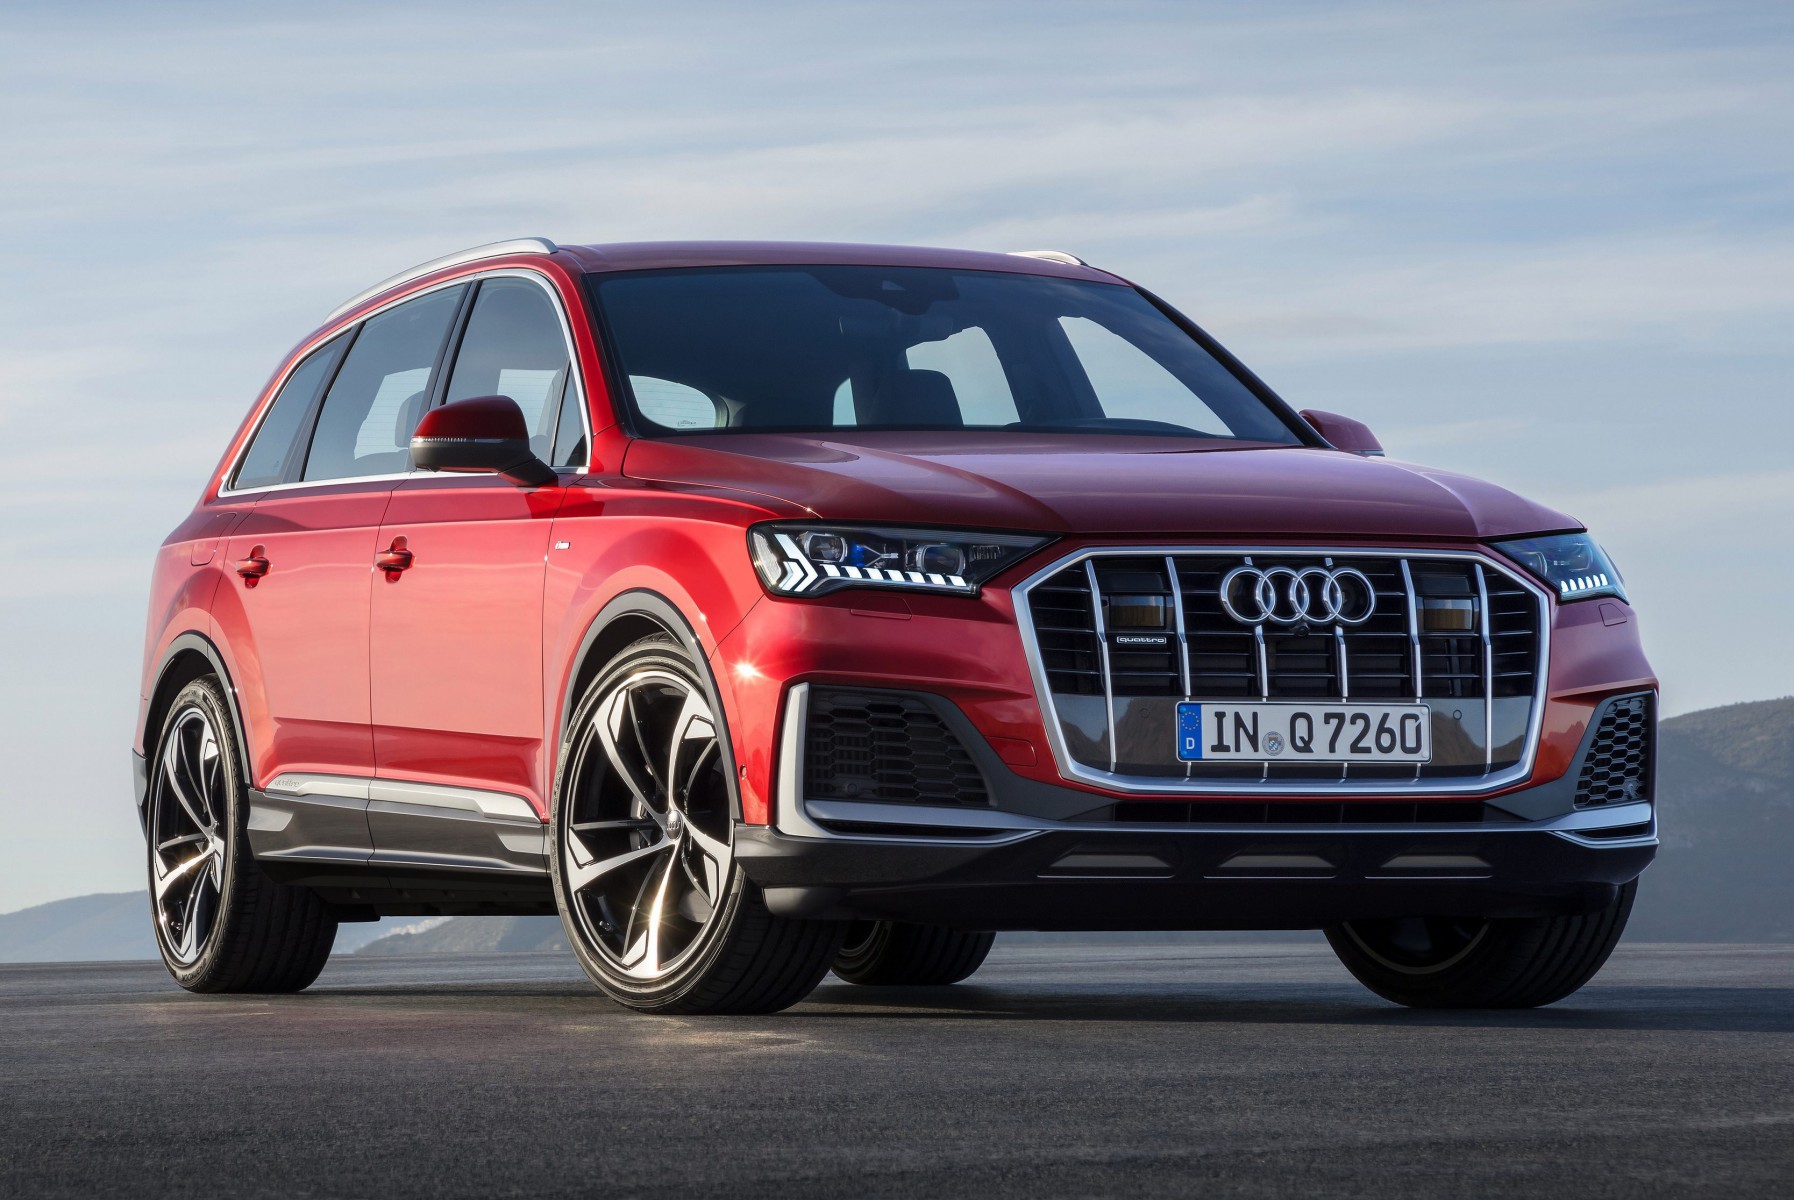 The Audi Q7 is favoured by Salah and many Barcelona stars